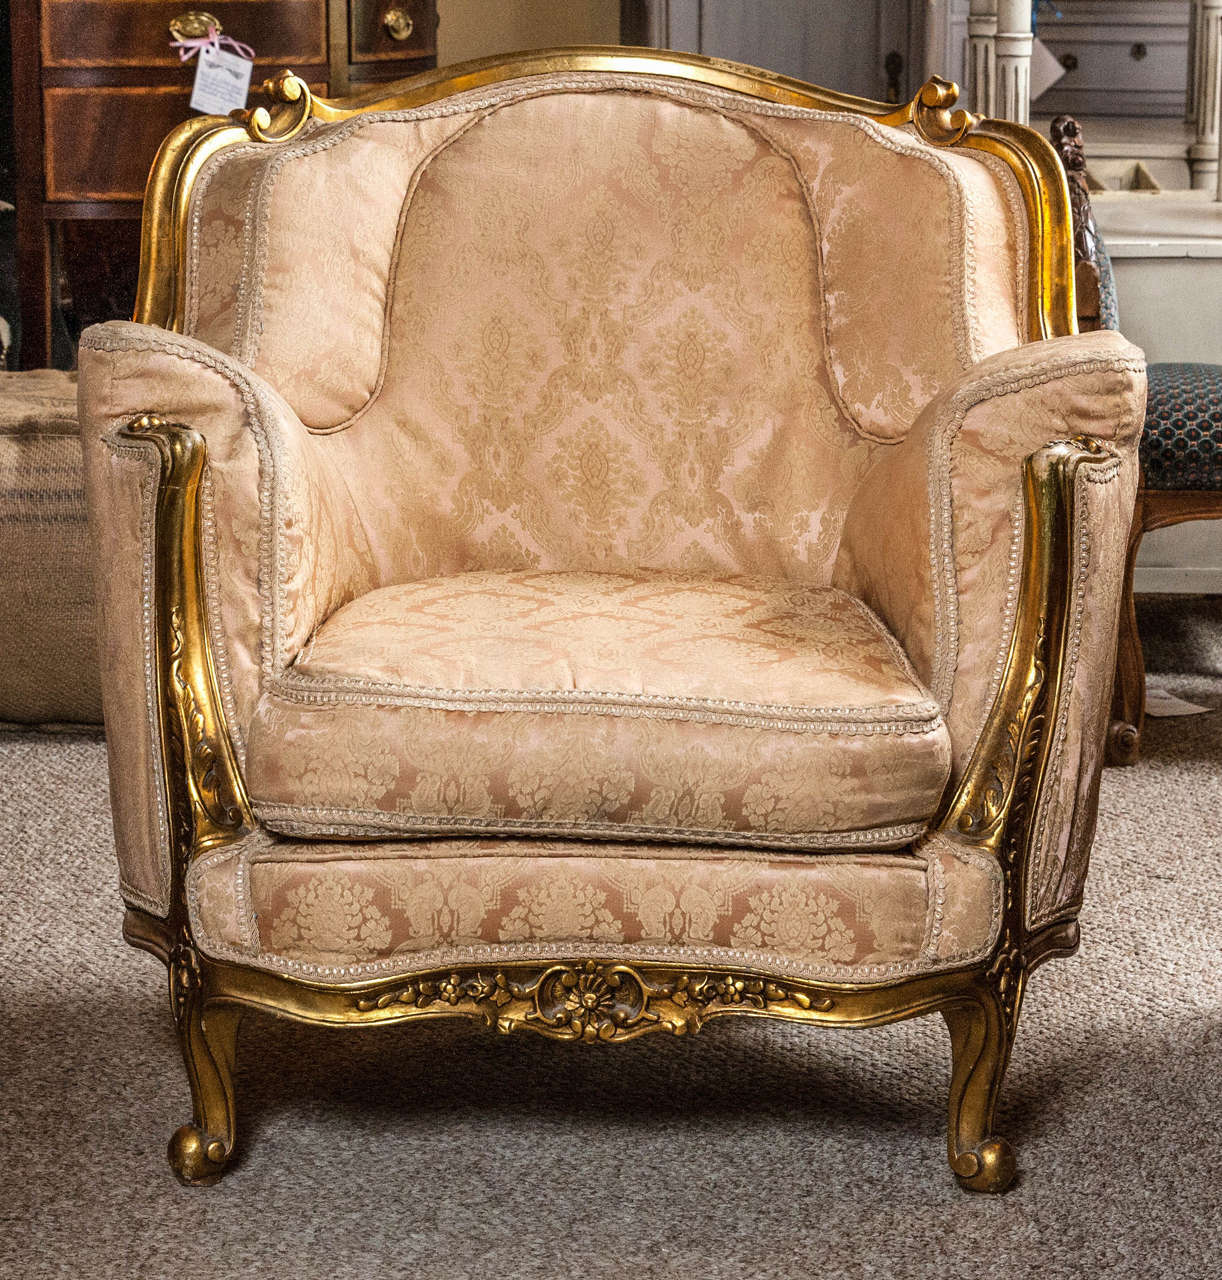 Pair of Louis XV Style Gilt Wood Bergere Chairs. This beautiful antique framed gilt wooden pair of Bergere / Lounge Chairs speak volumes in regards to fashion and flowing design. The pair have double padded back rests and arm rests. The Carved